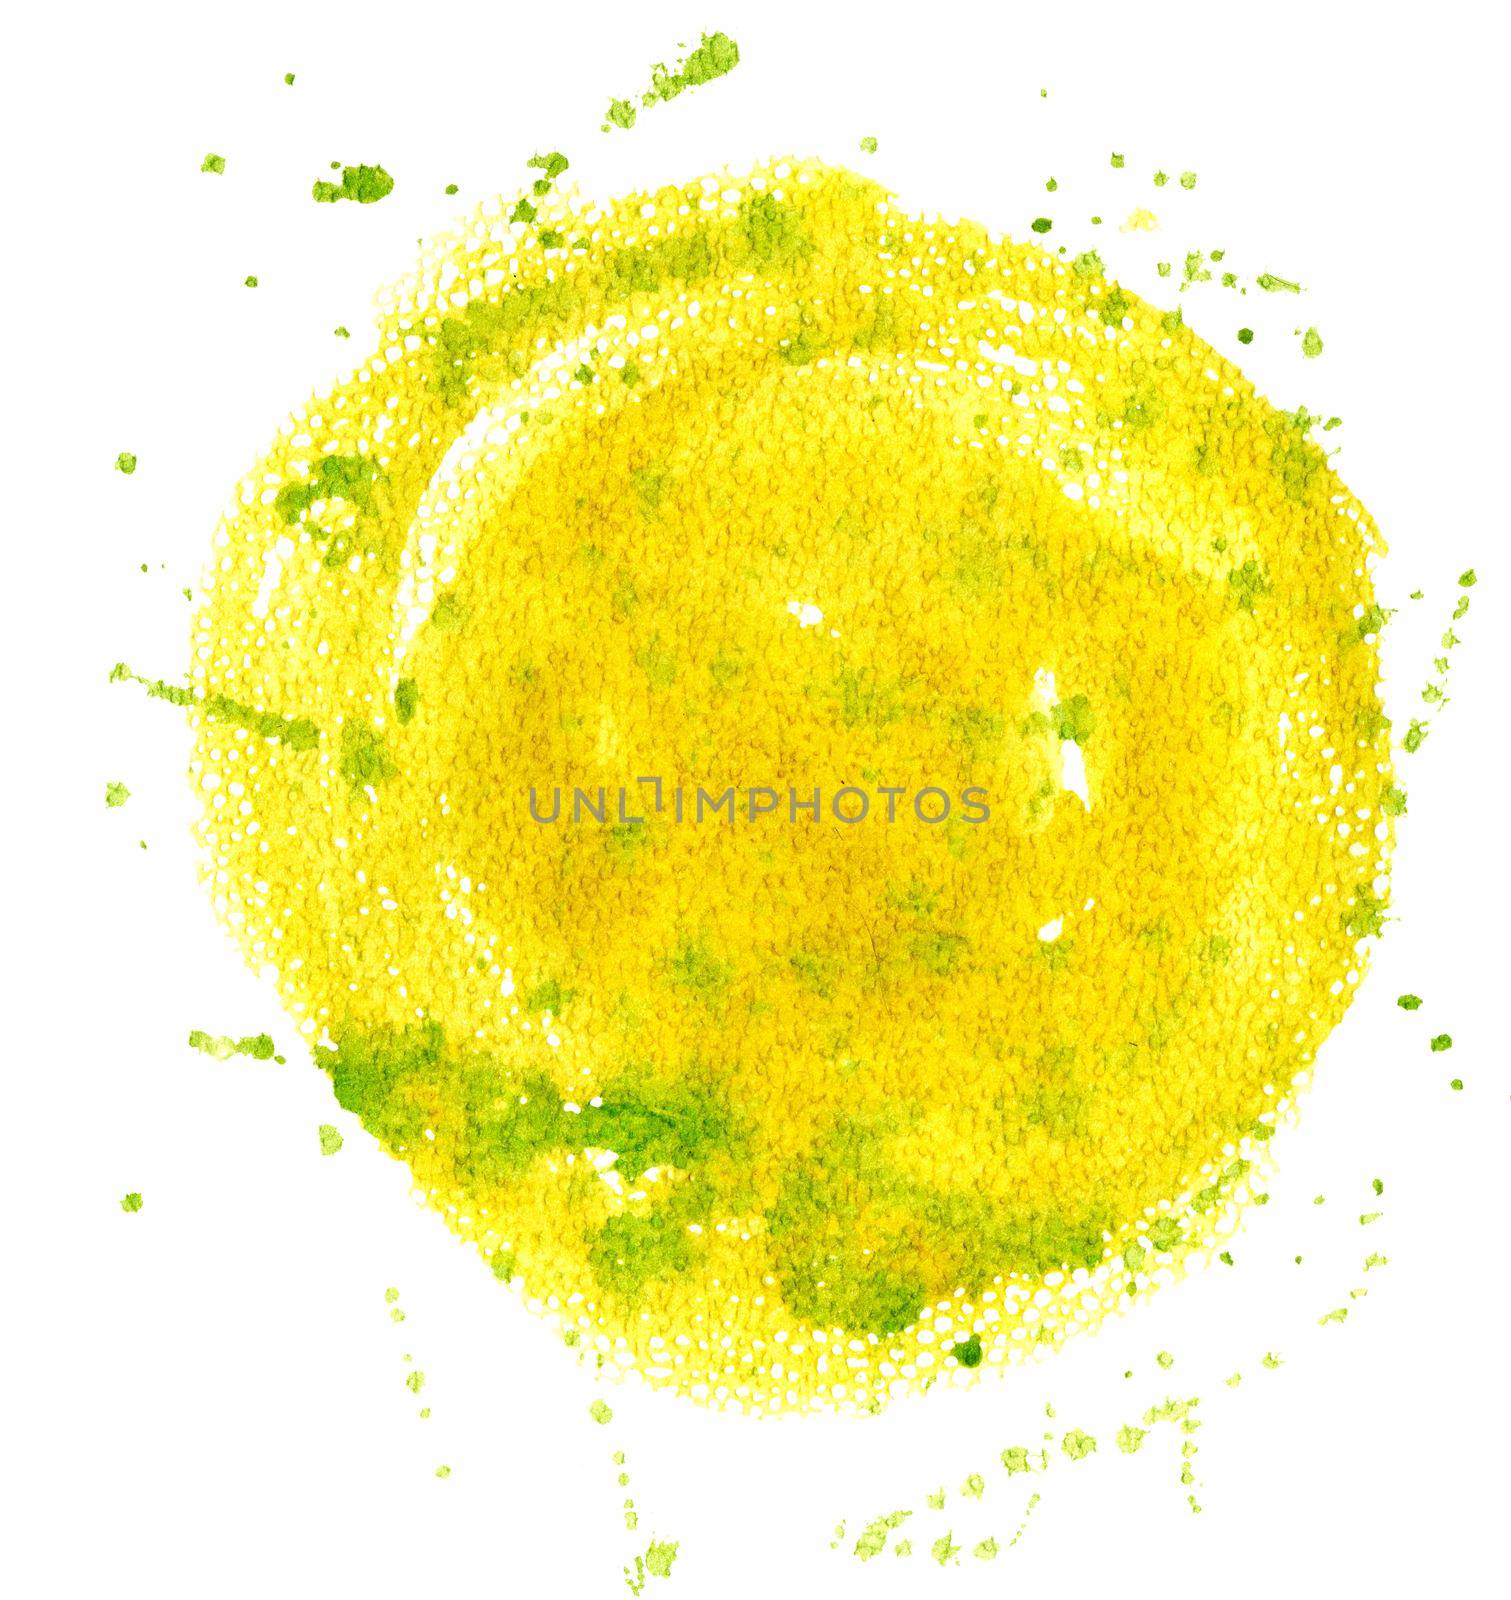 Yellow watercolor circle isolated on white background